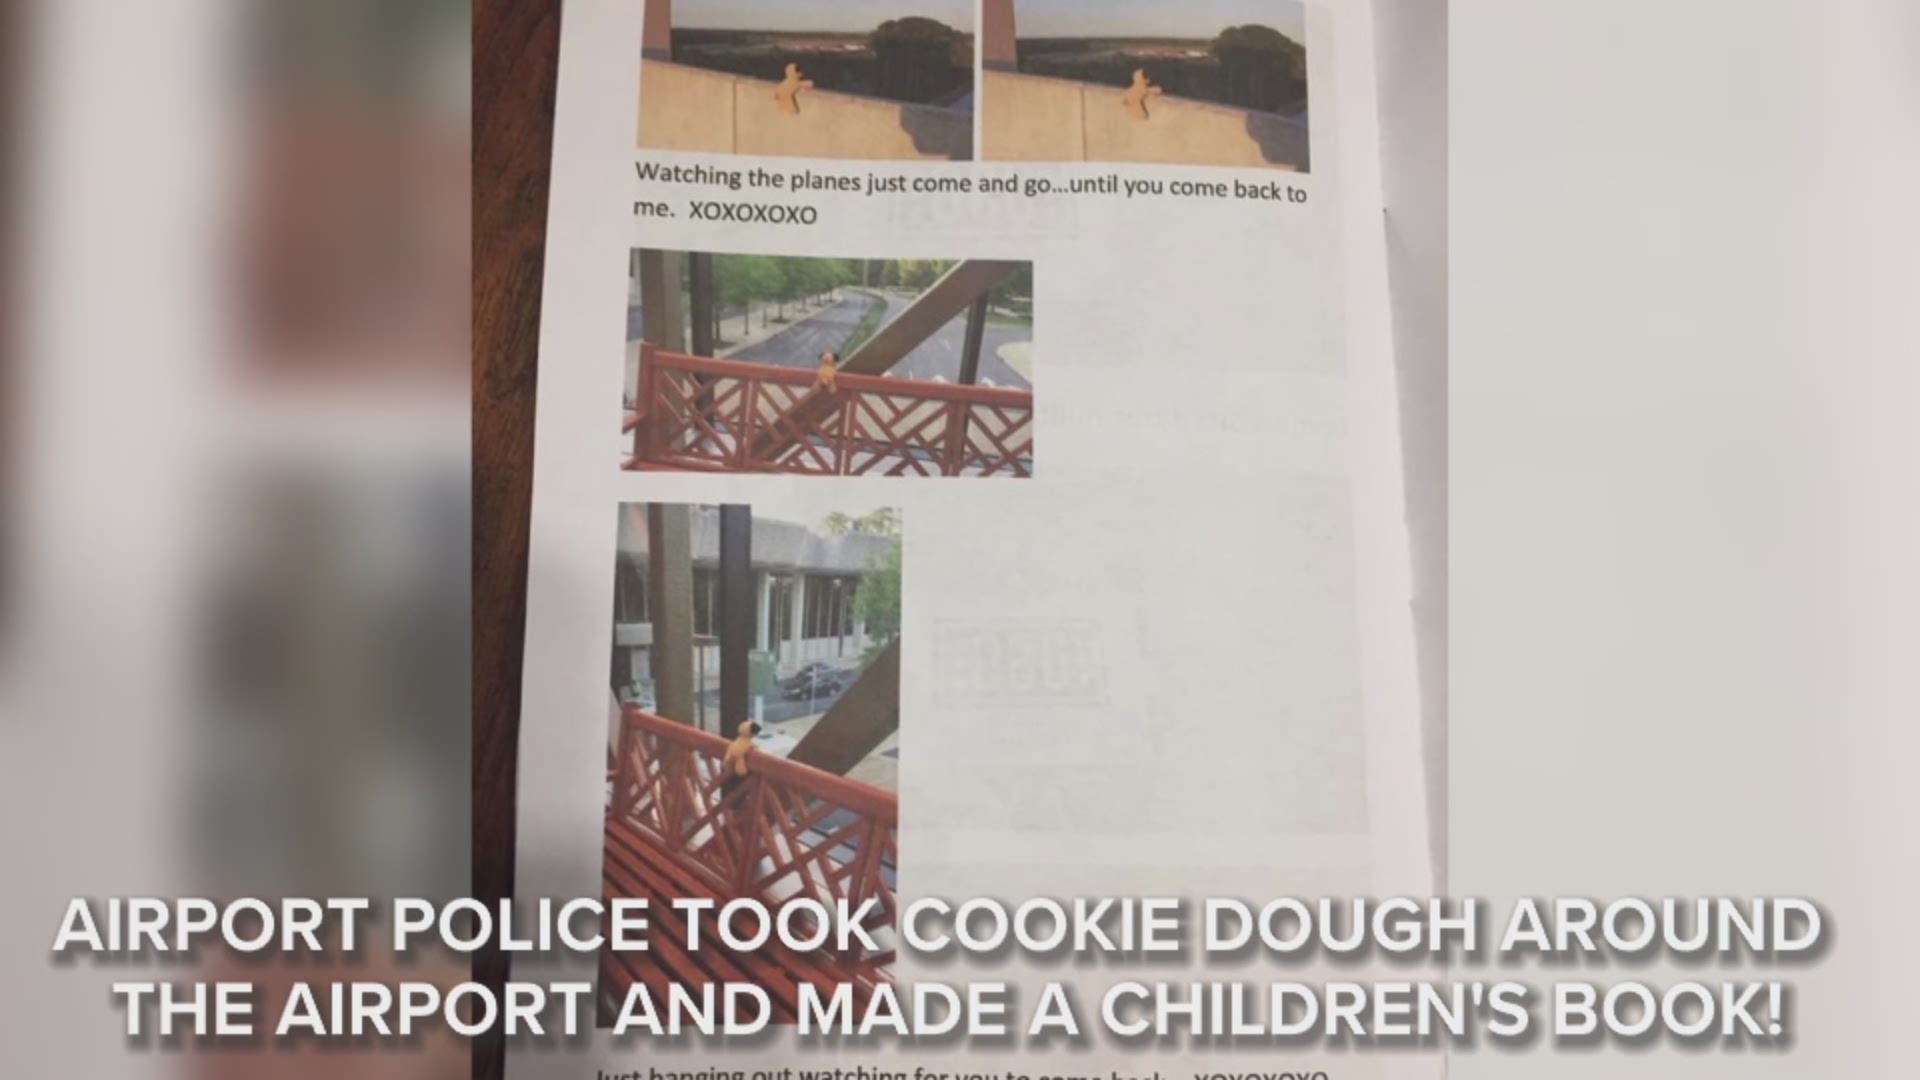 8-year-old Gussie Bridges lost her favorite stuffed animal, Cookie Dough, at Norfolk International Airport. Not only did airport police find the toy, they took it on an adventure around the airport and created a children's book out of it!